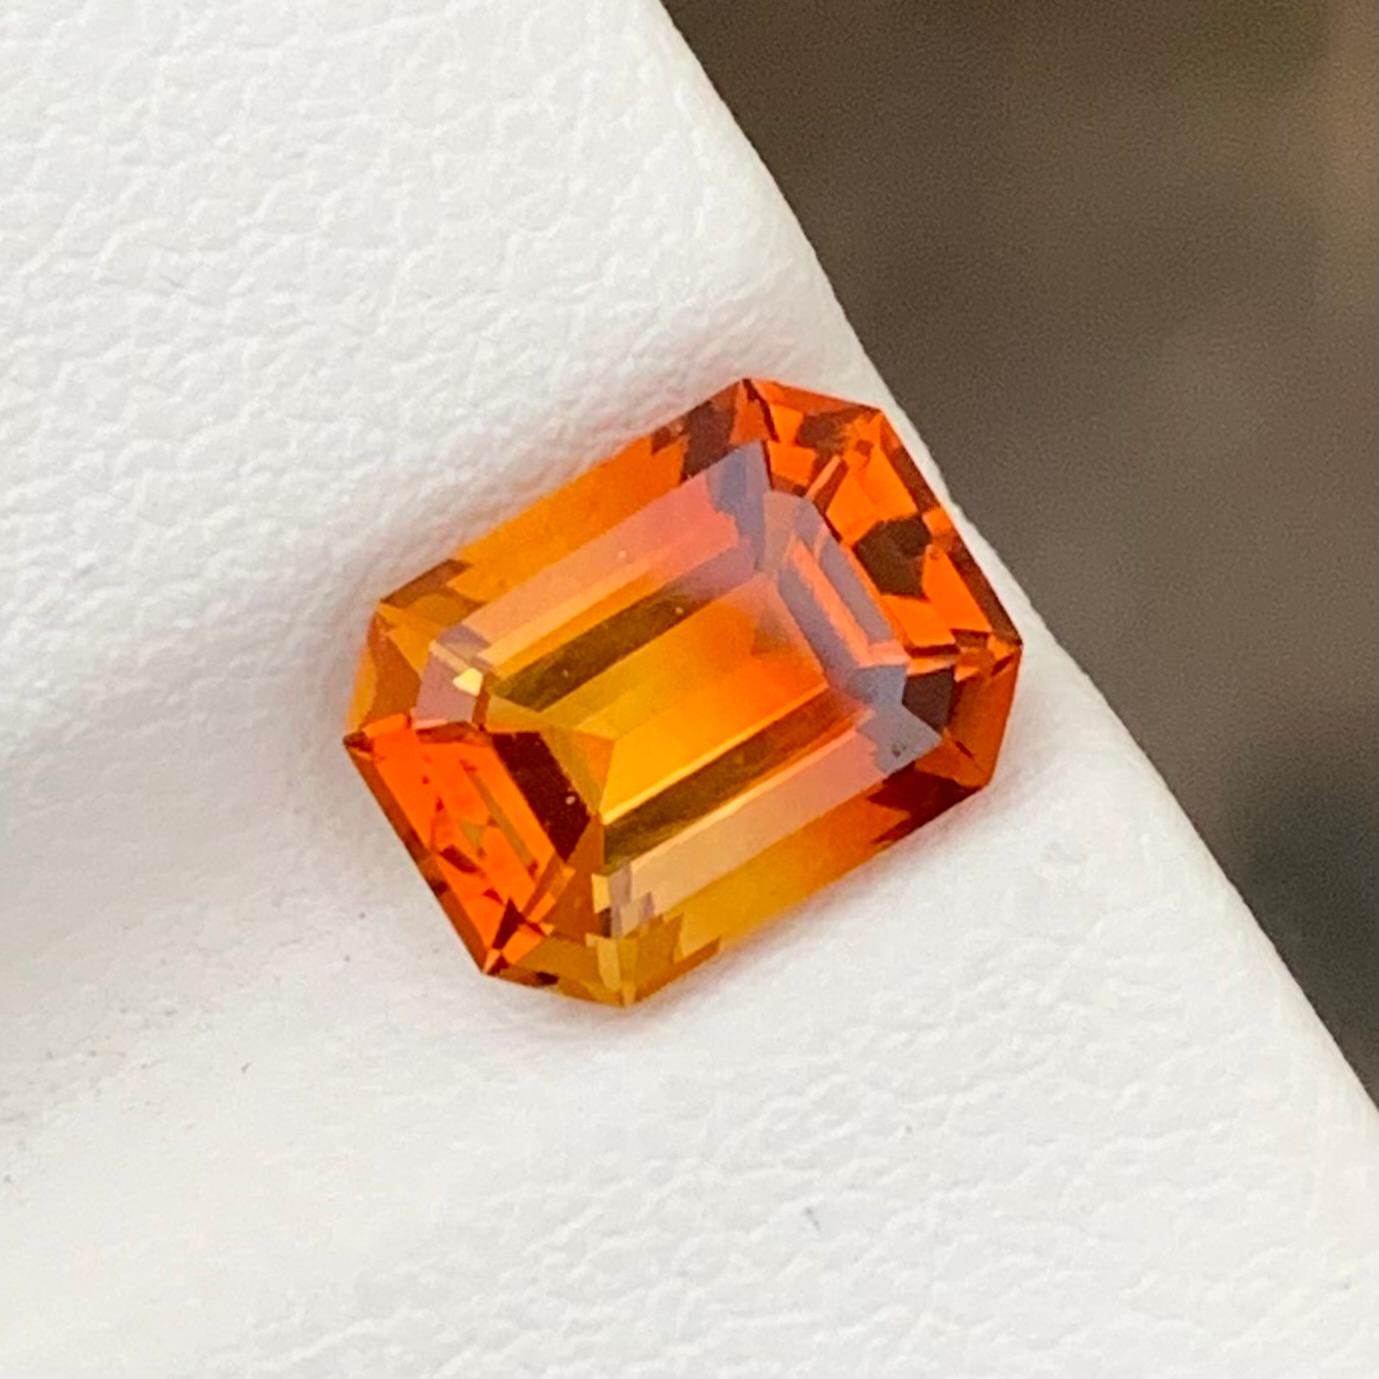 Loose Madeira Citrine
Weight: 2.10 Carats
Dimension: 9 x 6.8 x 5.3 Mm
Origin: Brazil
Colour : Orange and Yellow
Shape:  Emerald 
Certificate: On Demand

Madeira Citrine, a captivating gemstone named after the rich and warm tones reminiscent of the